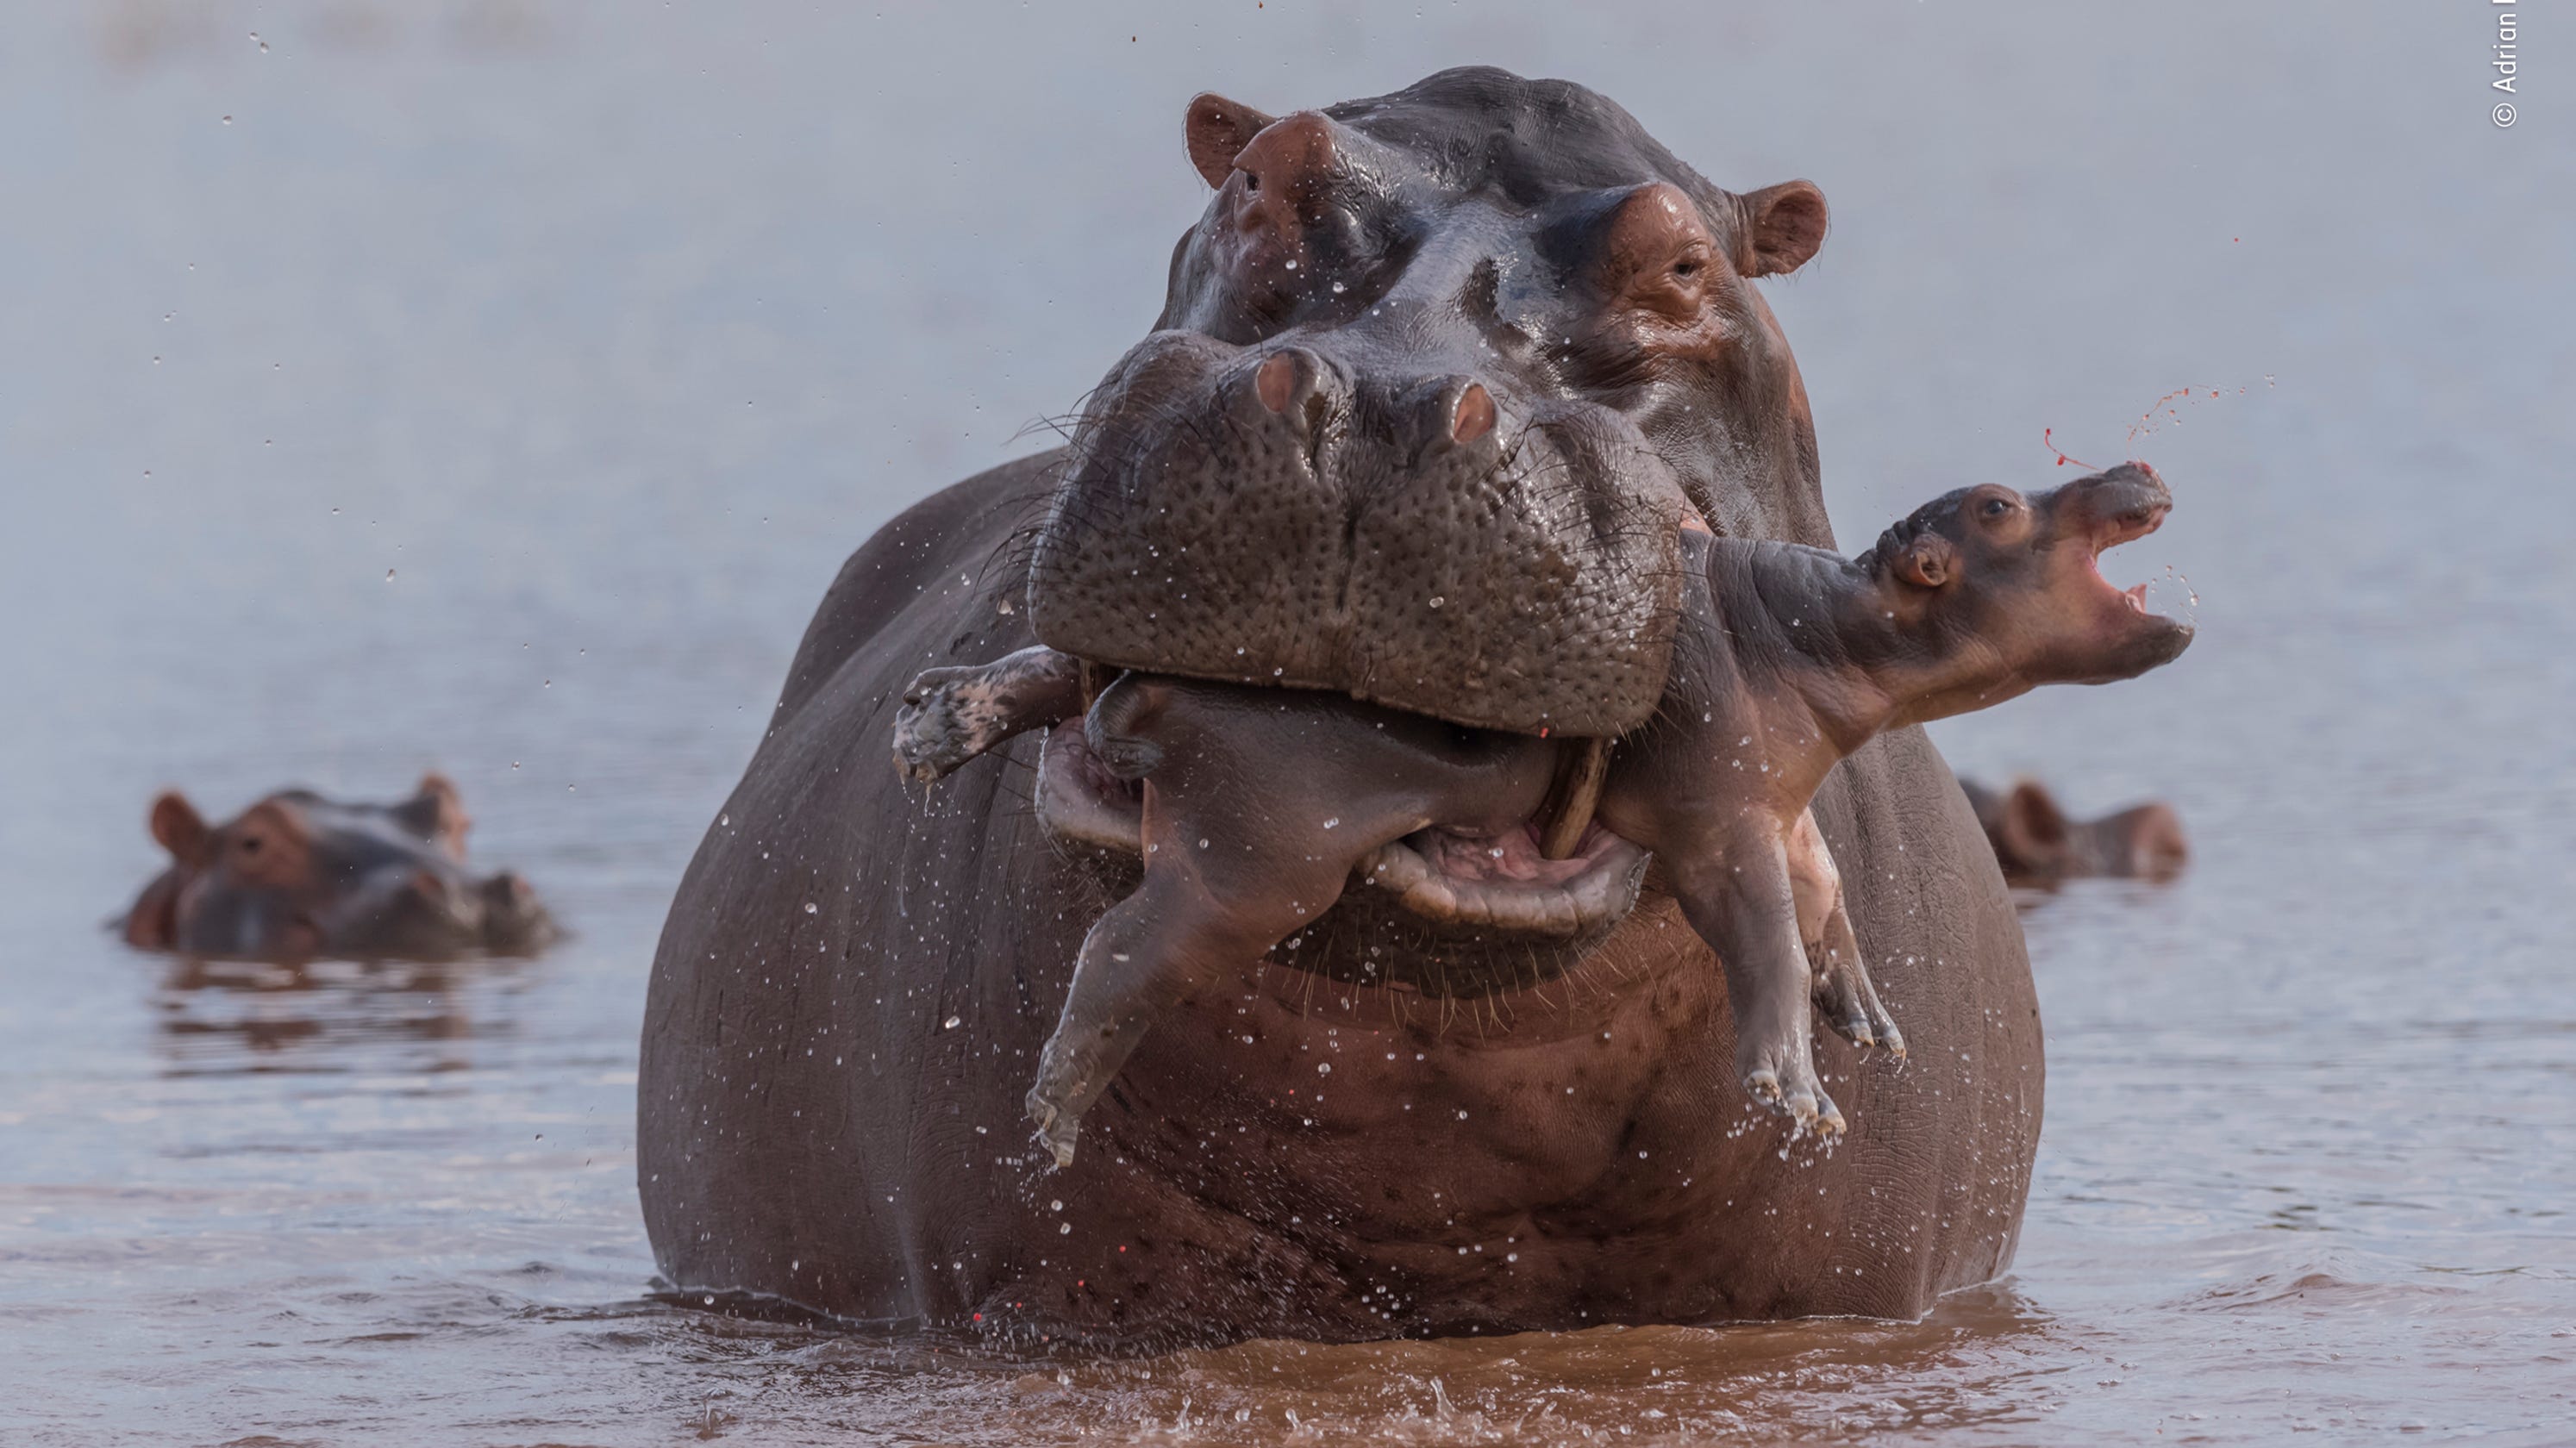 15-incredible-images-from-the-wildlife-photographer-of-the-year-competition